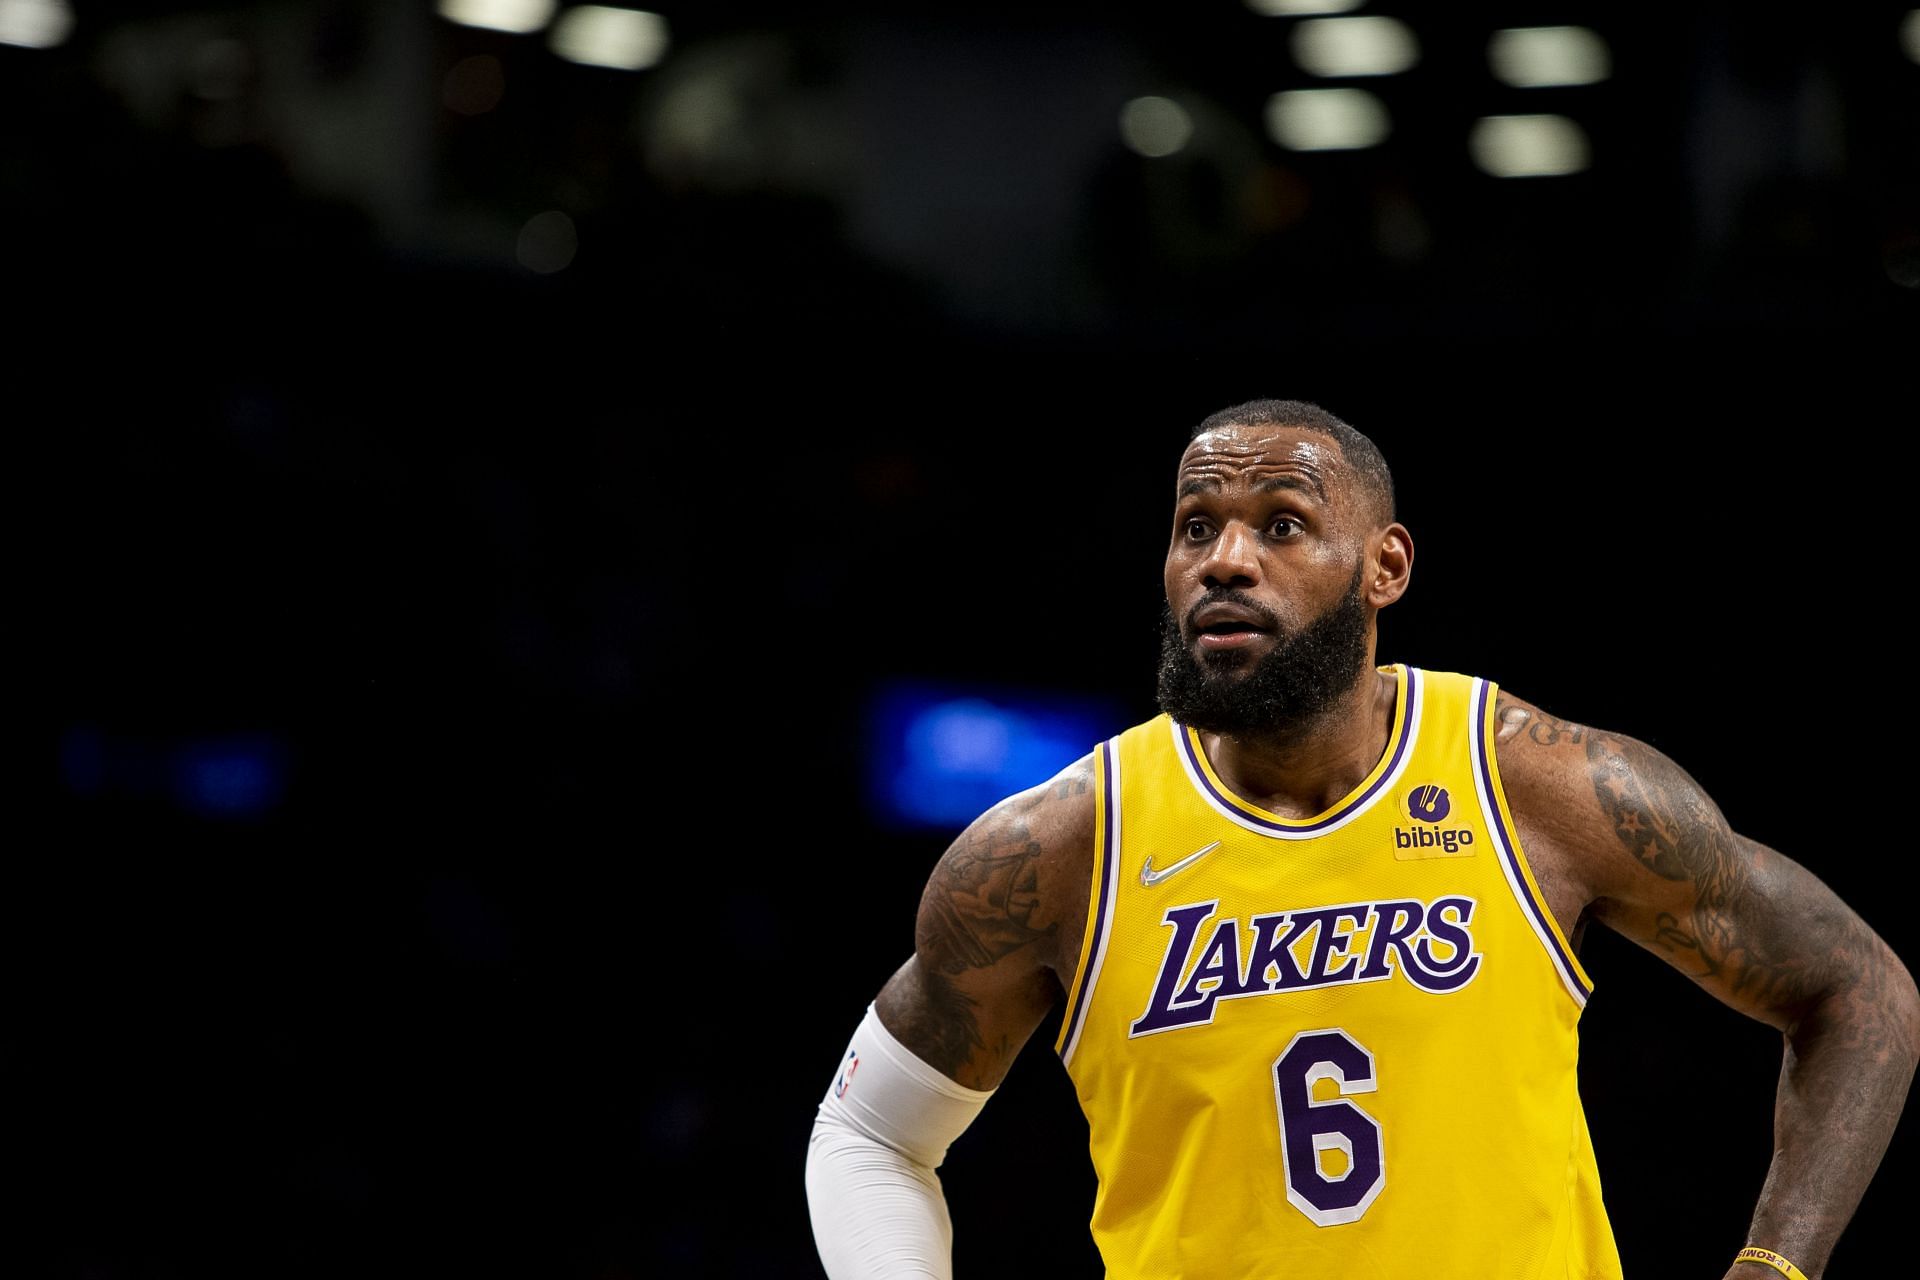 LeBron James of the LA Lakers reacts during action against the Brooklyn Nets on Jan. 25 in the Brooklyn borough of New York City.